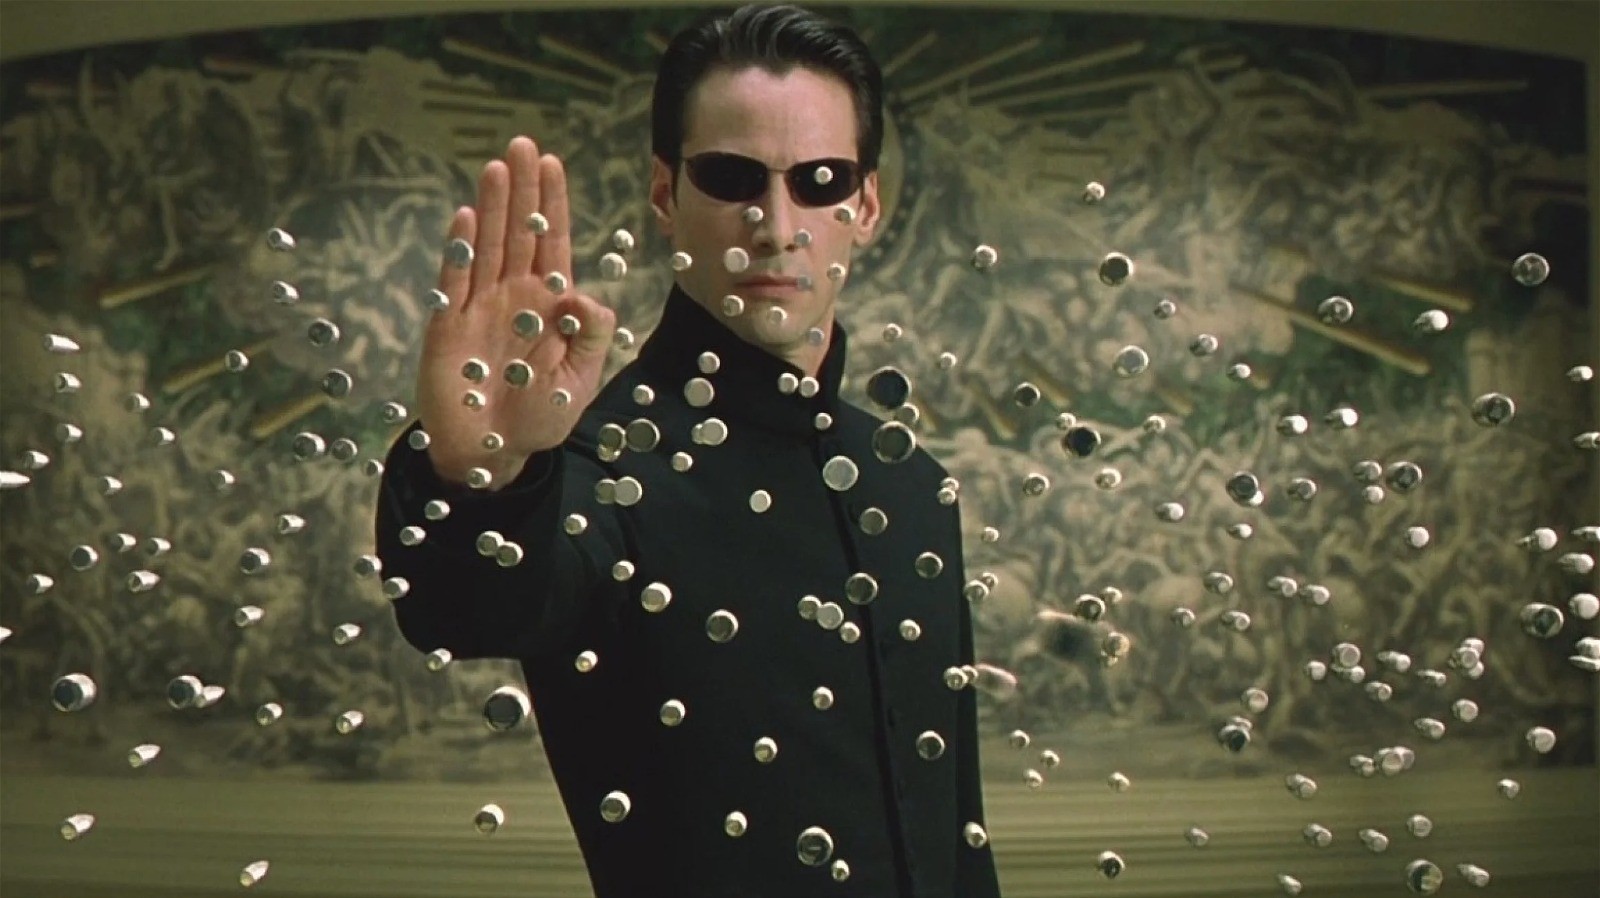 Bullet time in The Matrix